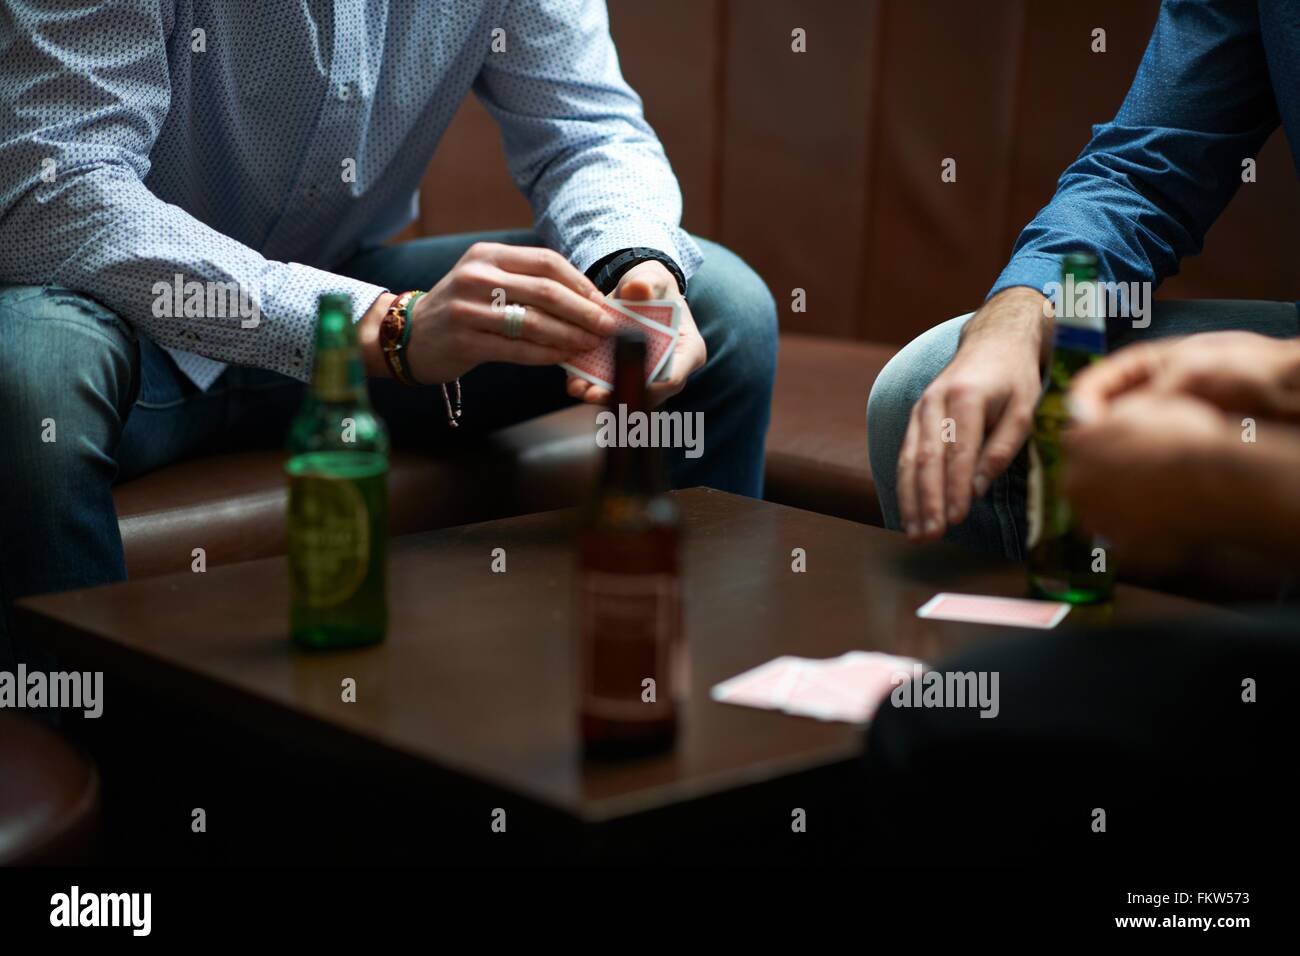 Hands of three men playing cards in traditional UK pub Stock Photo